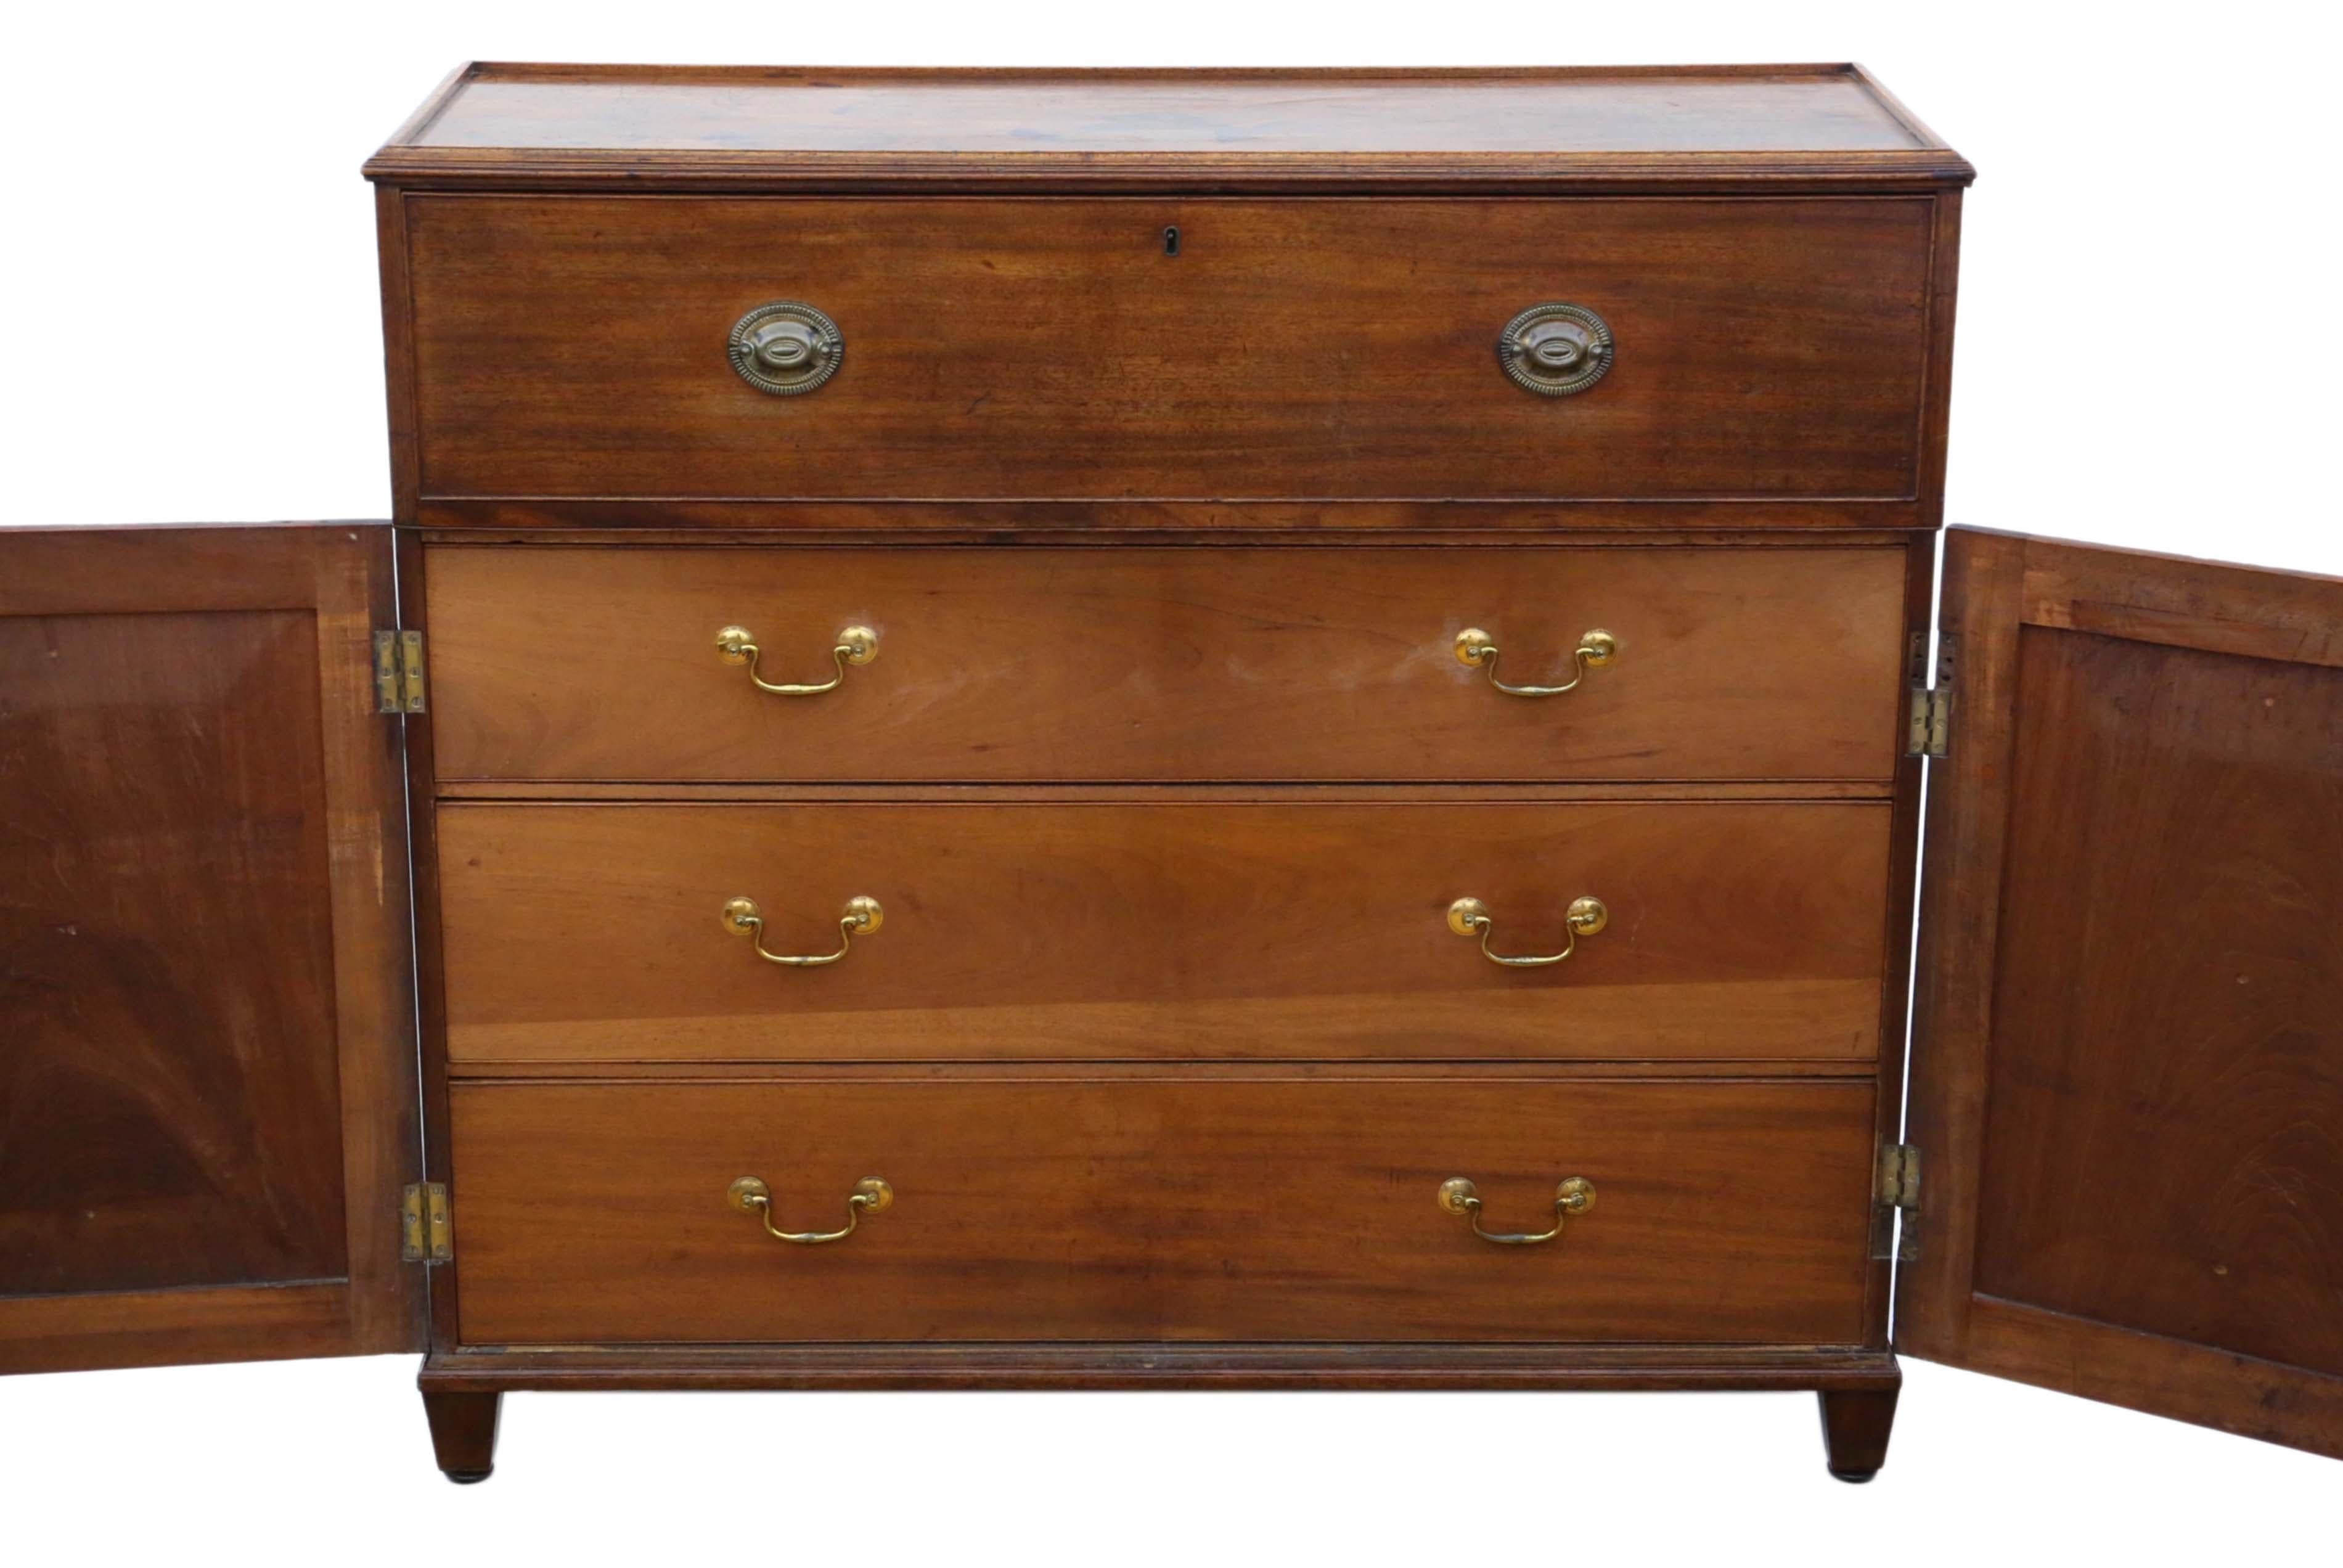 Antique 19th Century Mahogany Campaign Chest of Drawers In Good Condition For Sale In Wisbech, Cambridgeshire